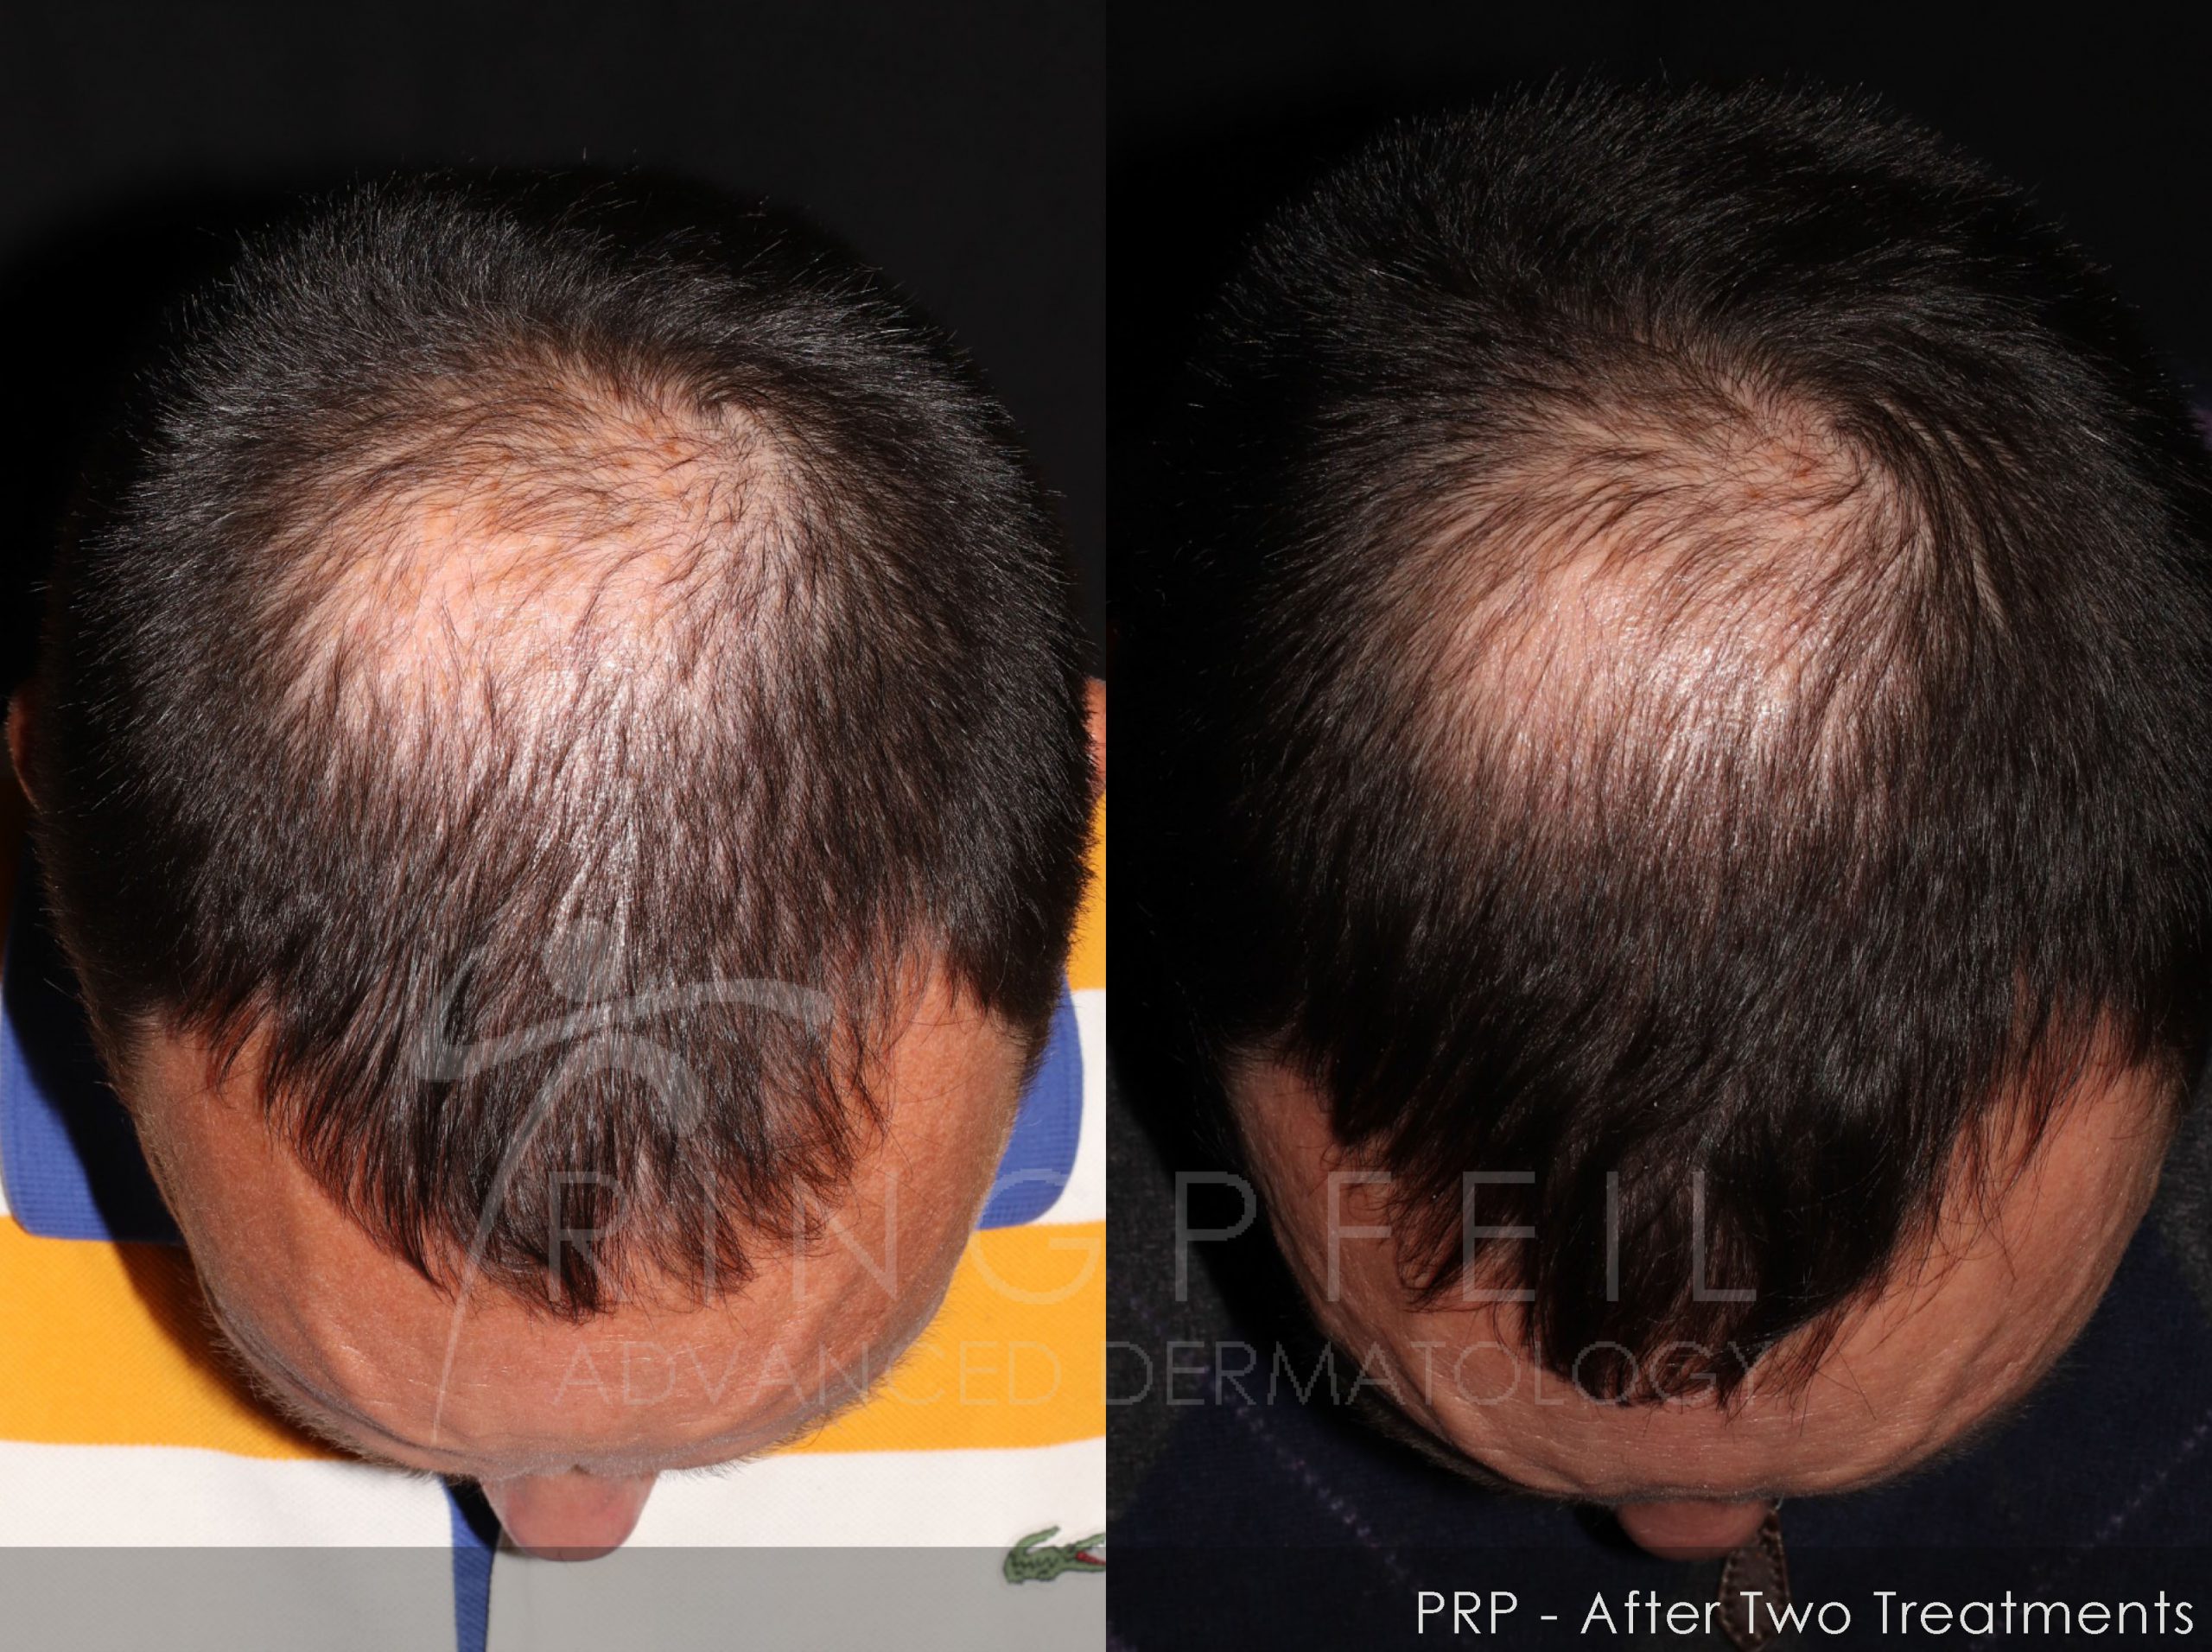 PRP after two treatments